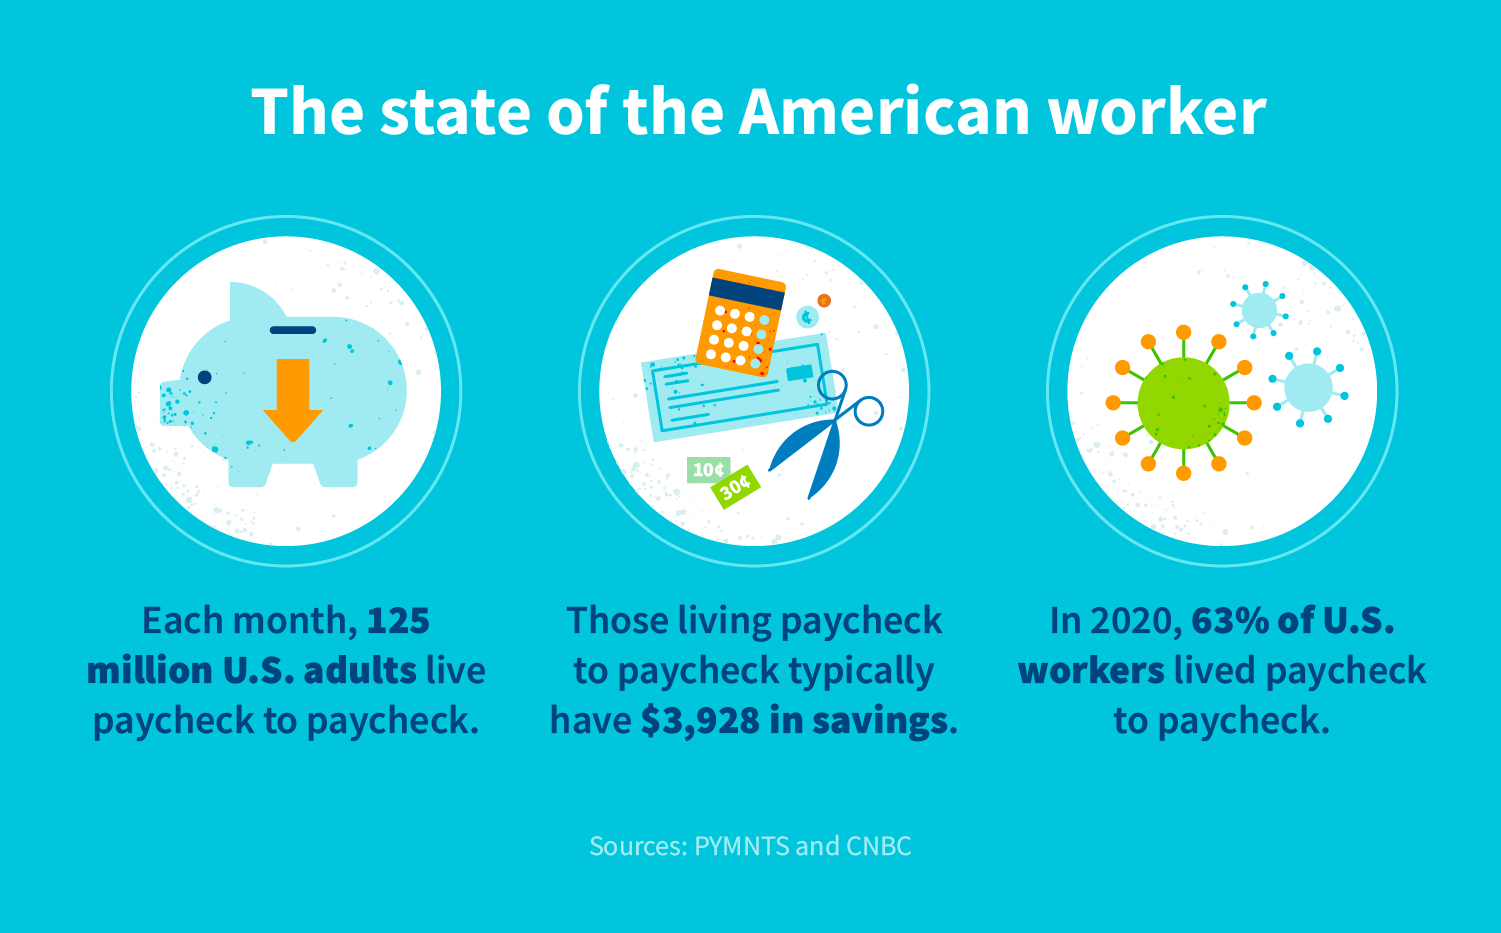 The state of the American worker